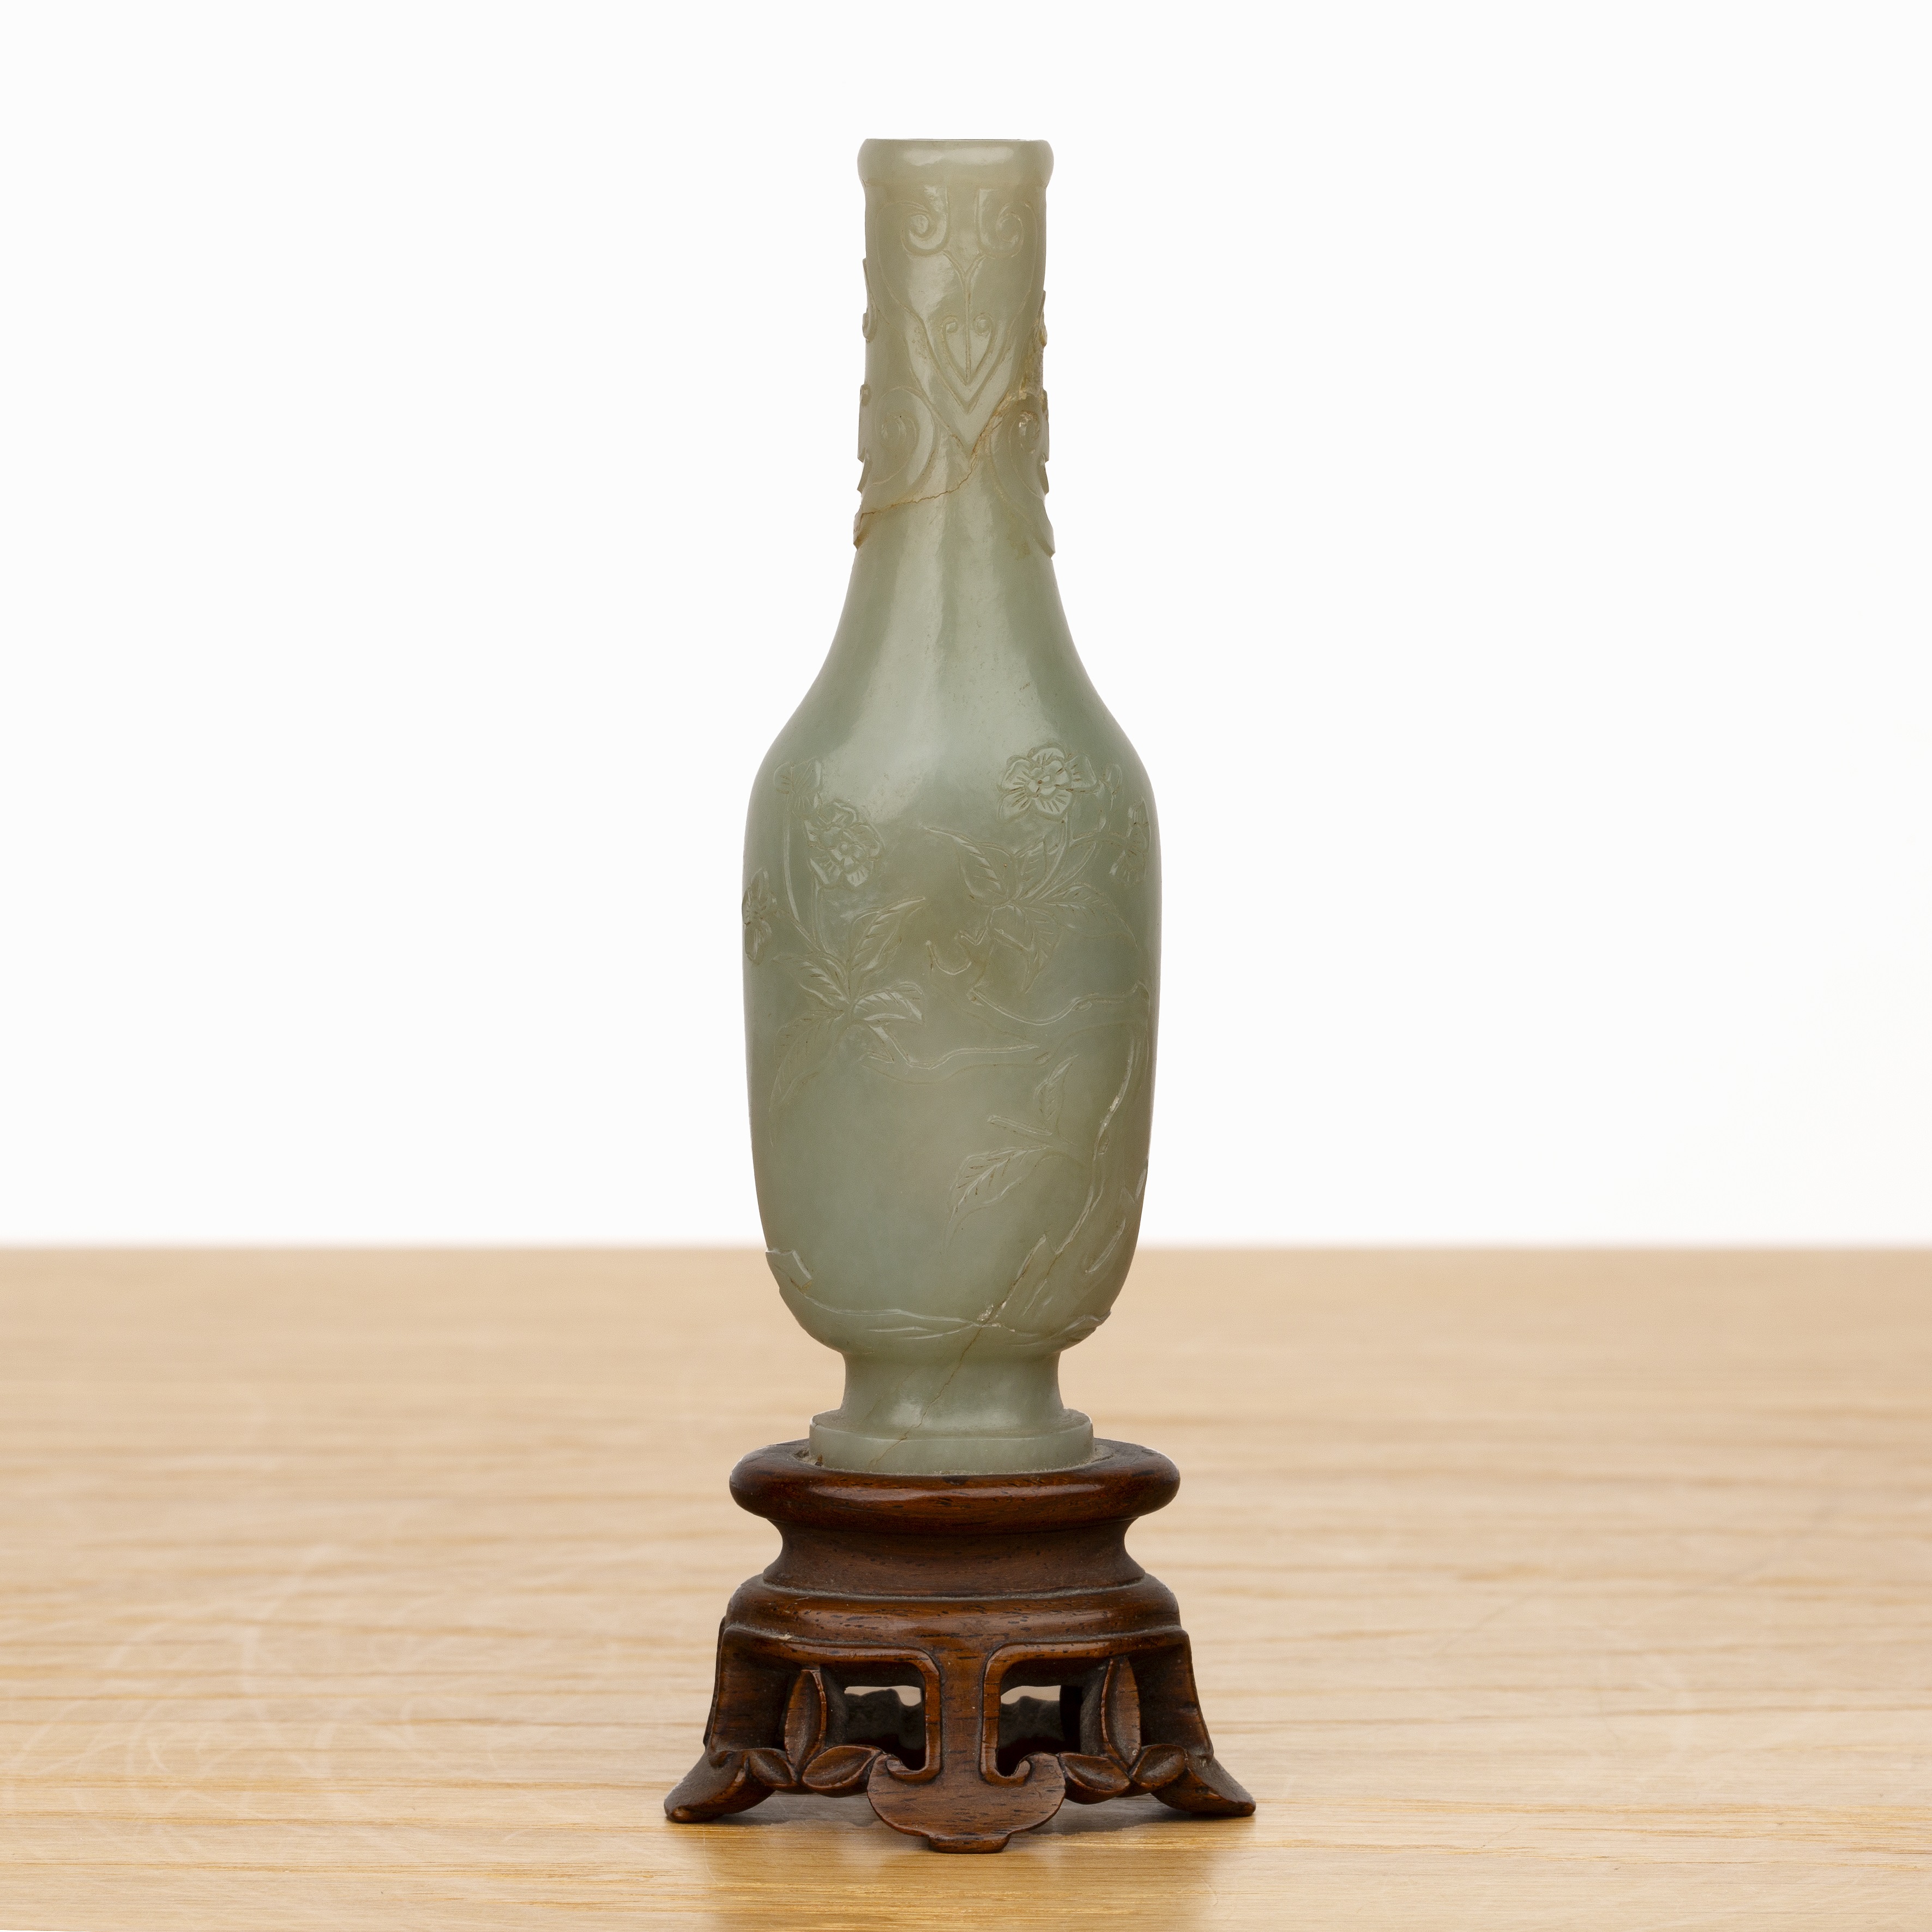 Small jade miniature vase on a wood stand Chinese, 18th/19th Century carved with flowers and - Image 2 of 10